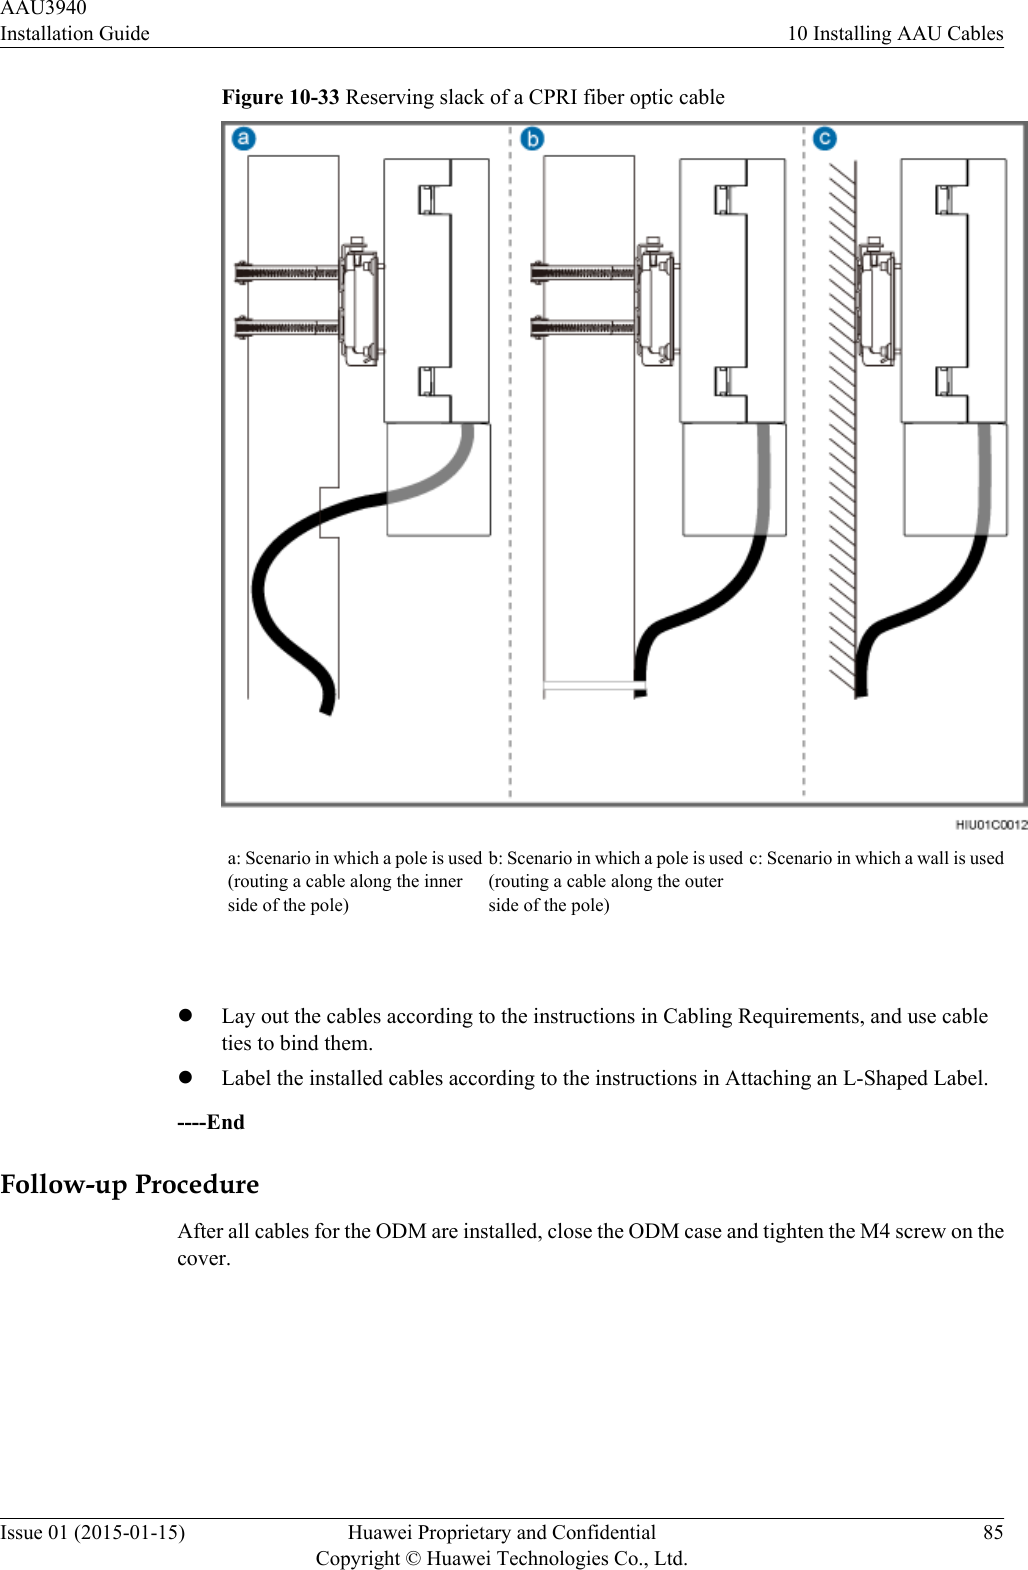 Figure 10-33 Reserving slack of a CPRI fiber optic cablea: Scenario in which a pole is used(routing a cable along the innerside of the pole)b: Scenario in which a pole is used(routing a cable along the outerside of the pole)c: Scenario in which a wall is used lLay out the cables according to the instructions in Cabling Requirements, and use cableties to bind them.lLabel the installed cables according to the instructions in Attaching an L-Shaped Label.----EndFollow-up ProcedureAfter all cables for the ODM are installed, close the ODM case and tighten the M4 screw on thecover.AAU3940Installation Guide 10 Installing AAU CablesIssue 01 (2015-01-15) Huawei Proprietary and ConfidentialCopyright © Huawei Technologies Co., Ltd.85